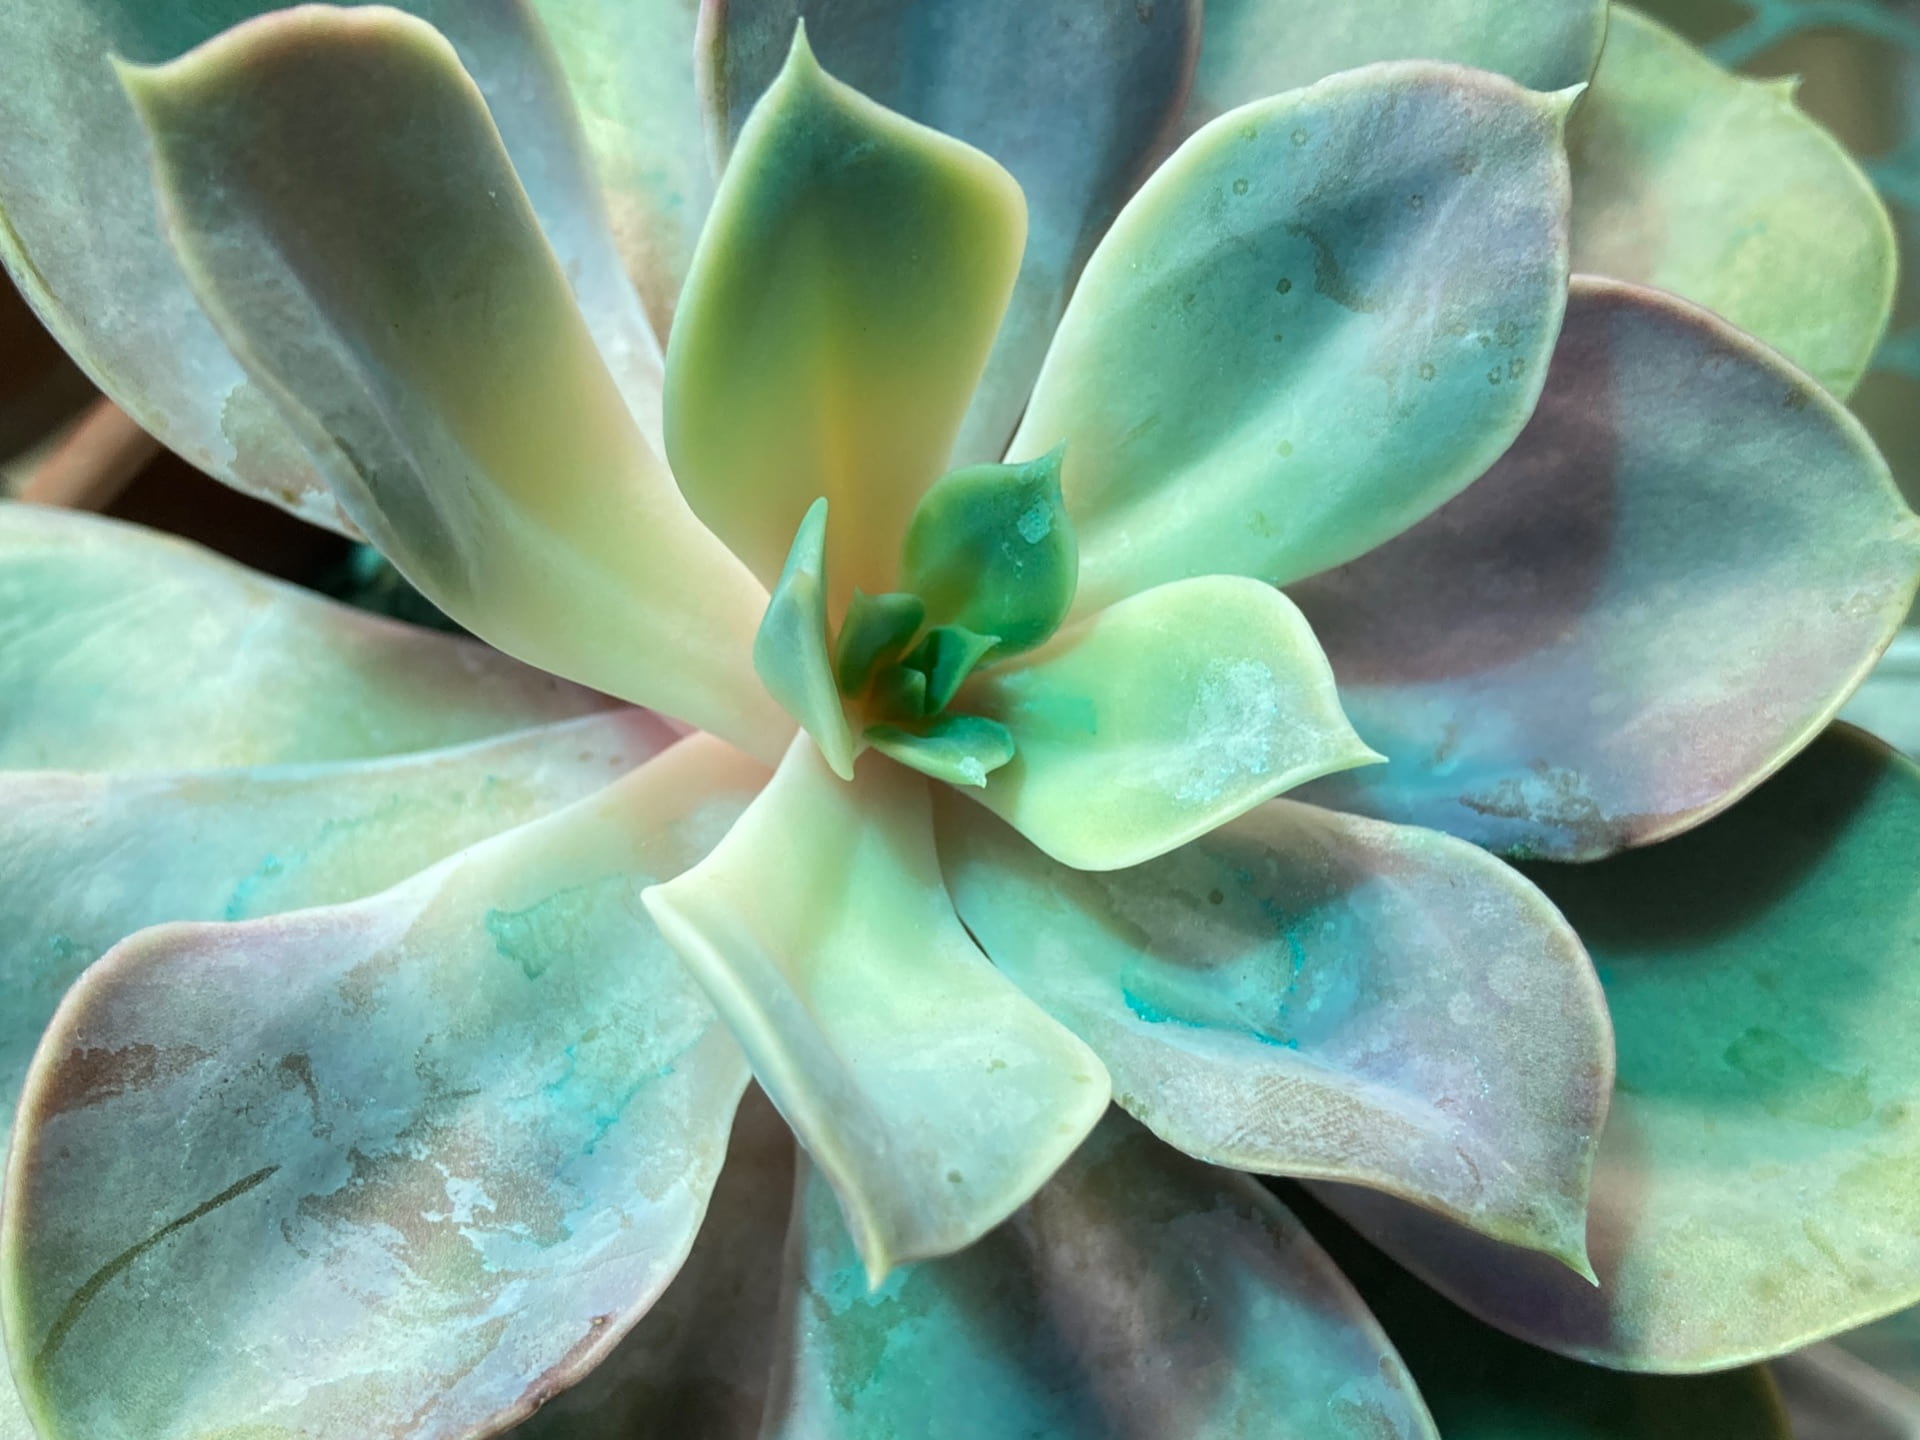 Glaucous waxy leaf coatings, as seen on this Echeveria sp., reflects ultraviolet light to slow desiccation and preserve water.